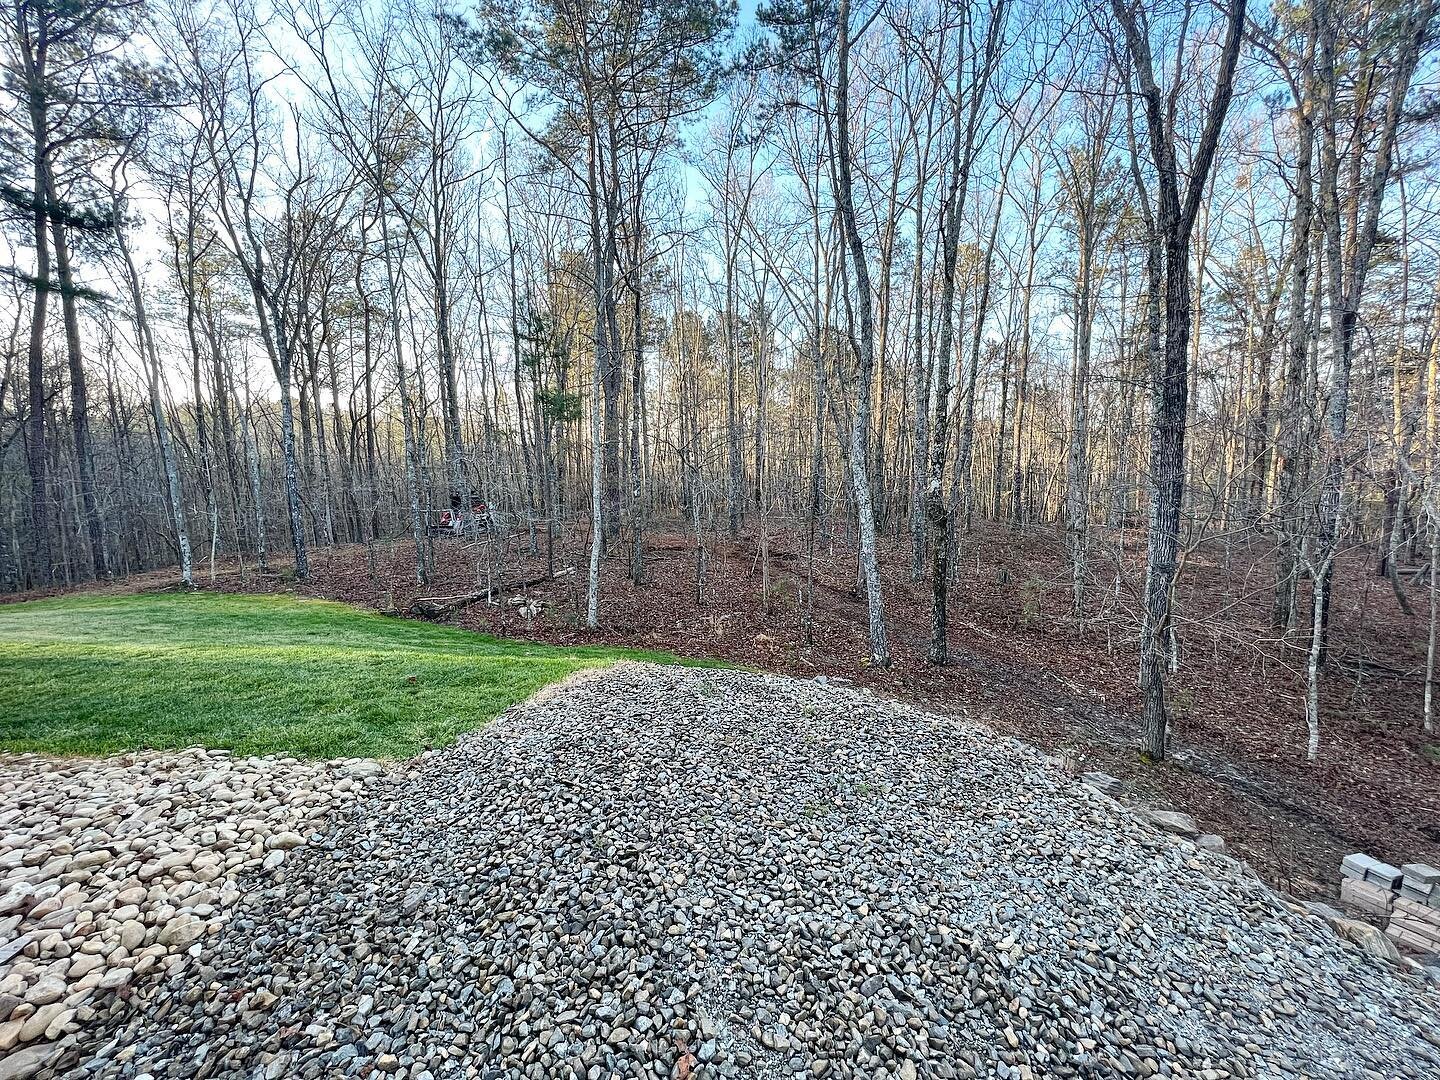 Before + After for one of our recent clients. Keep the trees you want and we&rsquo;ll clear the rest! 

#forestrymulching #takeuchi #buckeyelandmanagement #northgeorgia #outdoors #landmanagement